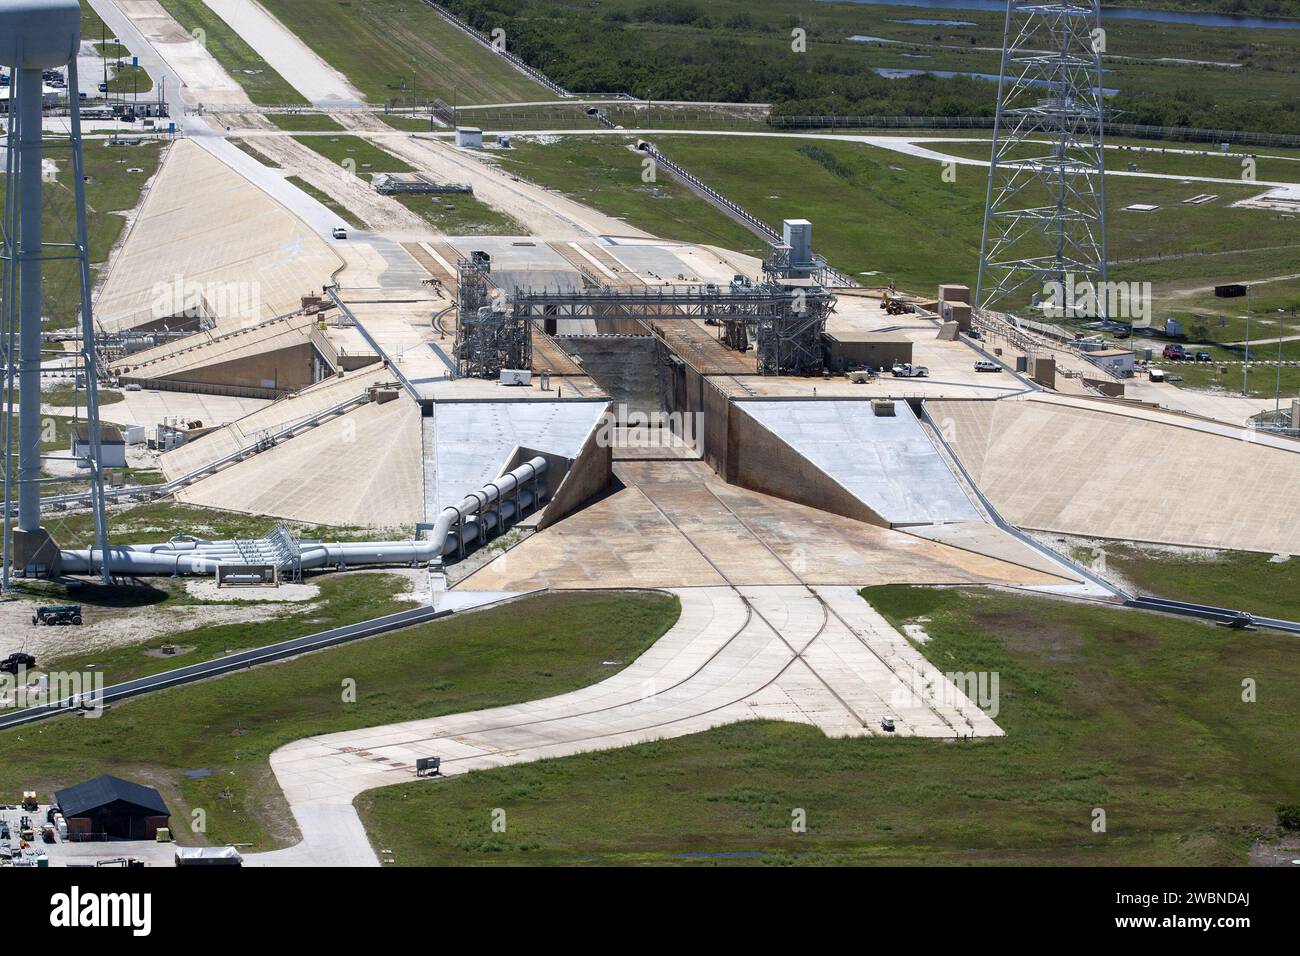 CAPE CANAVERAL, Fla. – An aerial view shows construction progress at Launch Pad 39B at NASA’s Kennedy Space Center in Florida. A new elevator has been constructed on the surface of the pad and the crawlerway leading up to the surface is being repaired. Repairs also are being made to the crawler track panels and catacomb roof below on either side of the flame trench. To the right is one of three tall lightning towers. Upgrades are underway at Pad B and other facilities in the Launch Complex 39 area. The Ground Systems Development and Operations, or GSDO, Program office at Kennedy is leading the Stock Photo